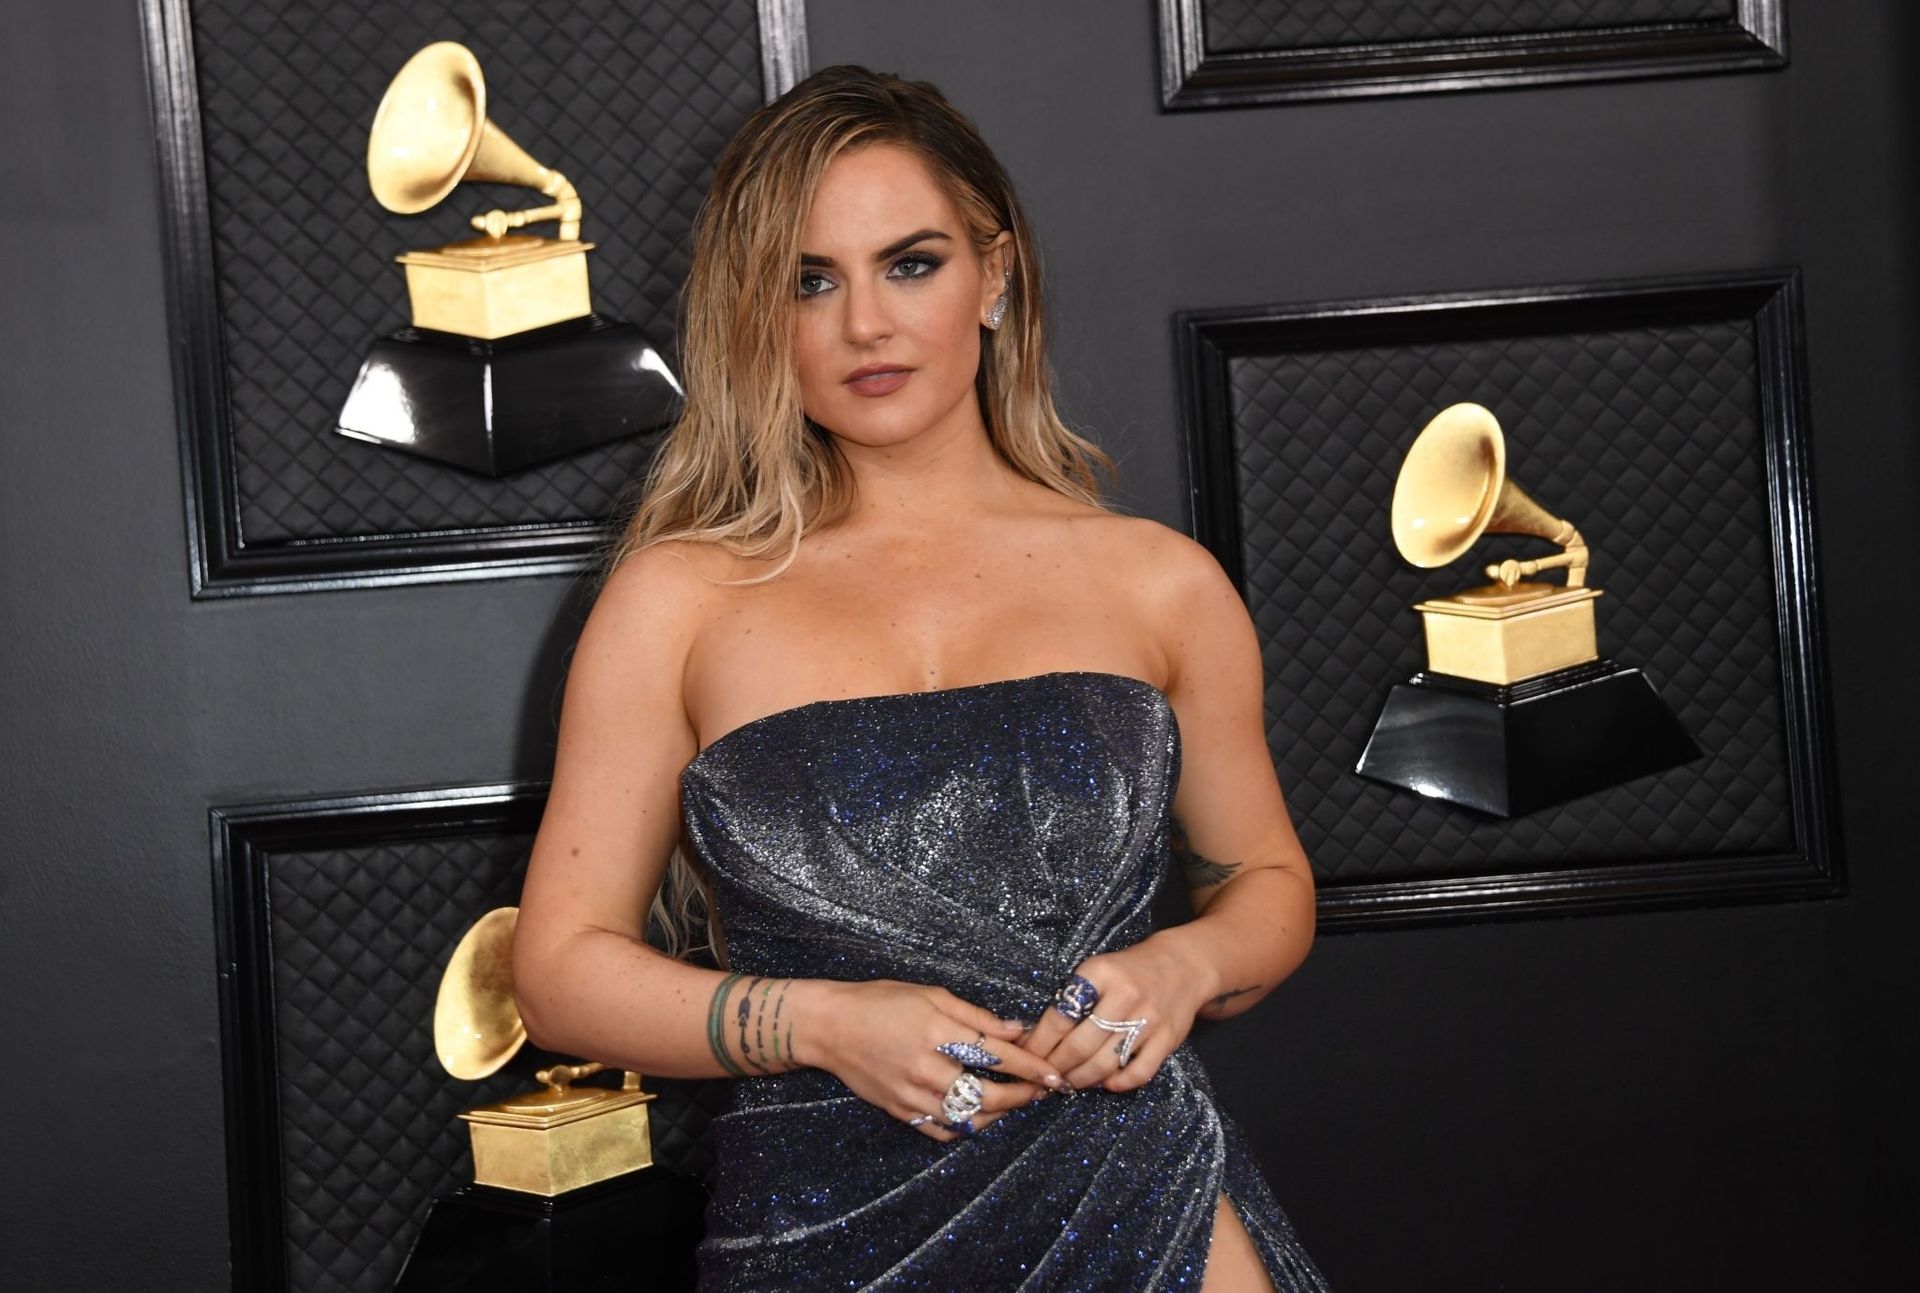 Jojo Shows Her Legs And Cleavage At The 62nd Annual Grammy Awards 0037